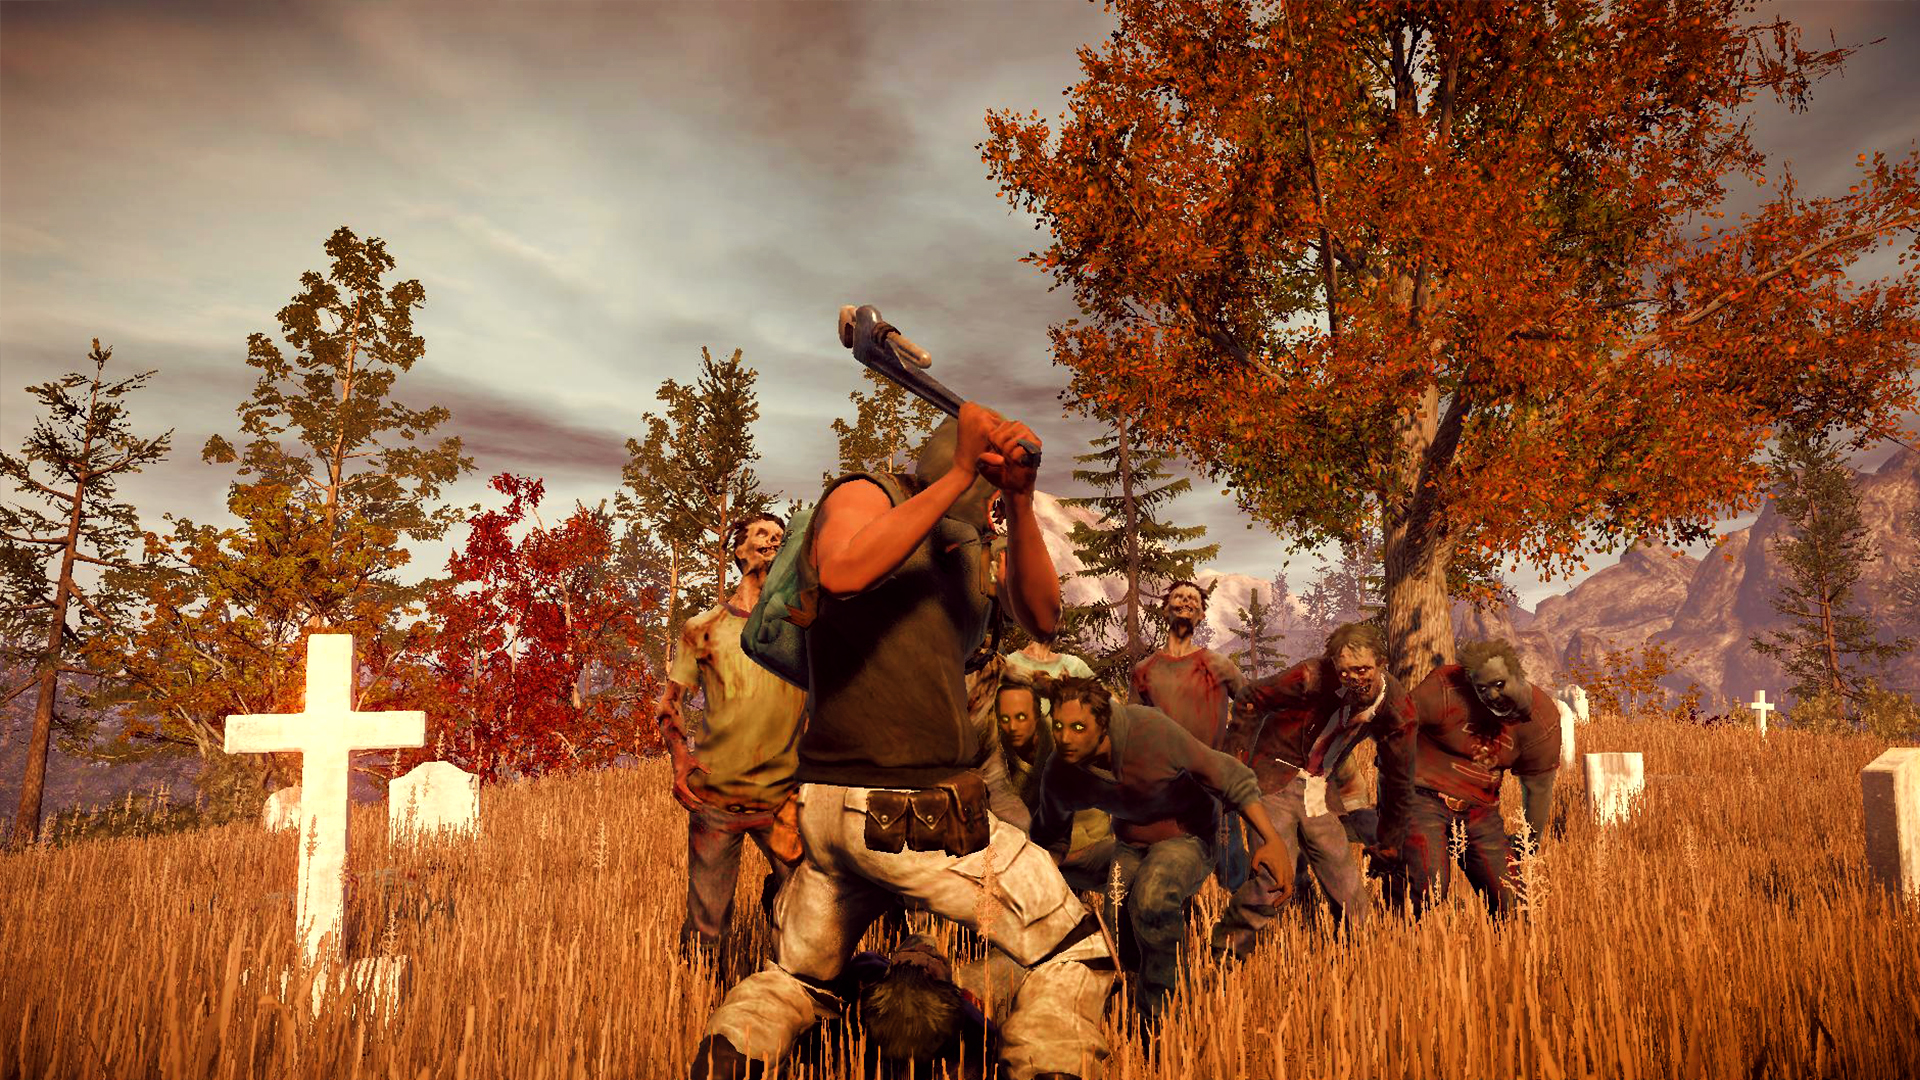 State Of Decay Backgrounds, Compatible - PC, Mobile, Gadgets| 1920x1080 px